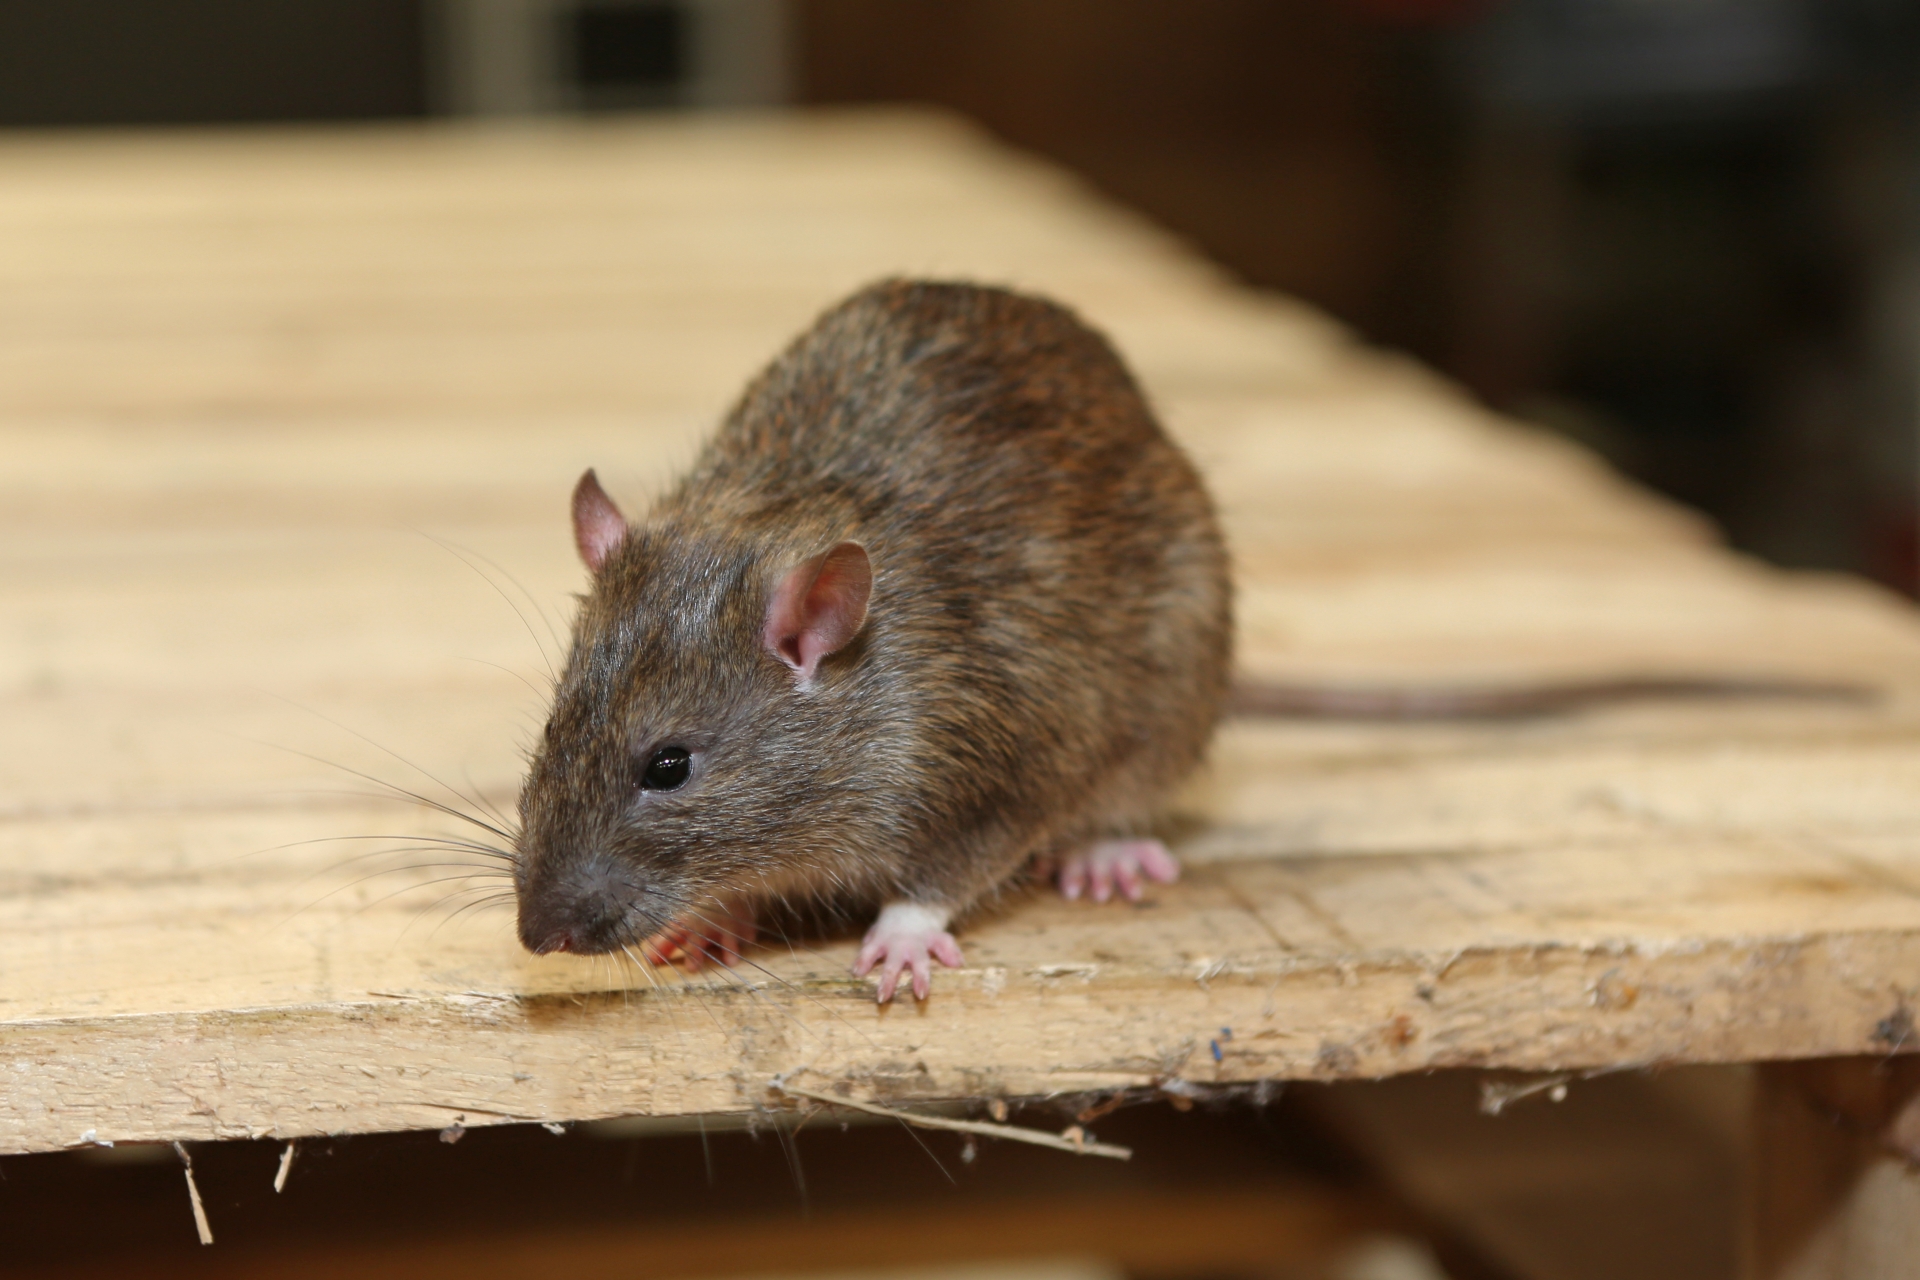 Rat Infestation, Pest Control in London. Call Now 020 3519 0469